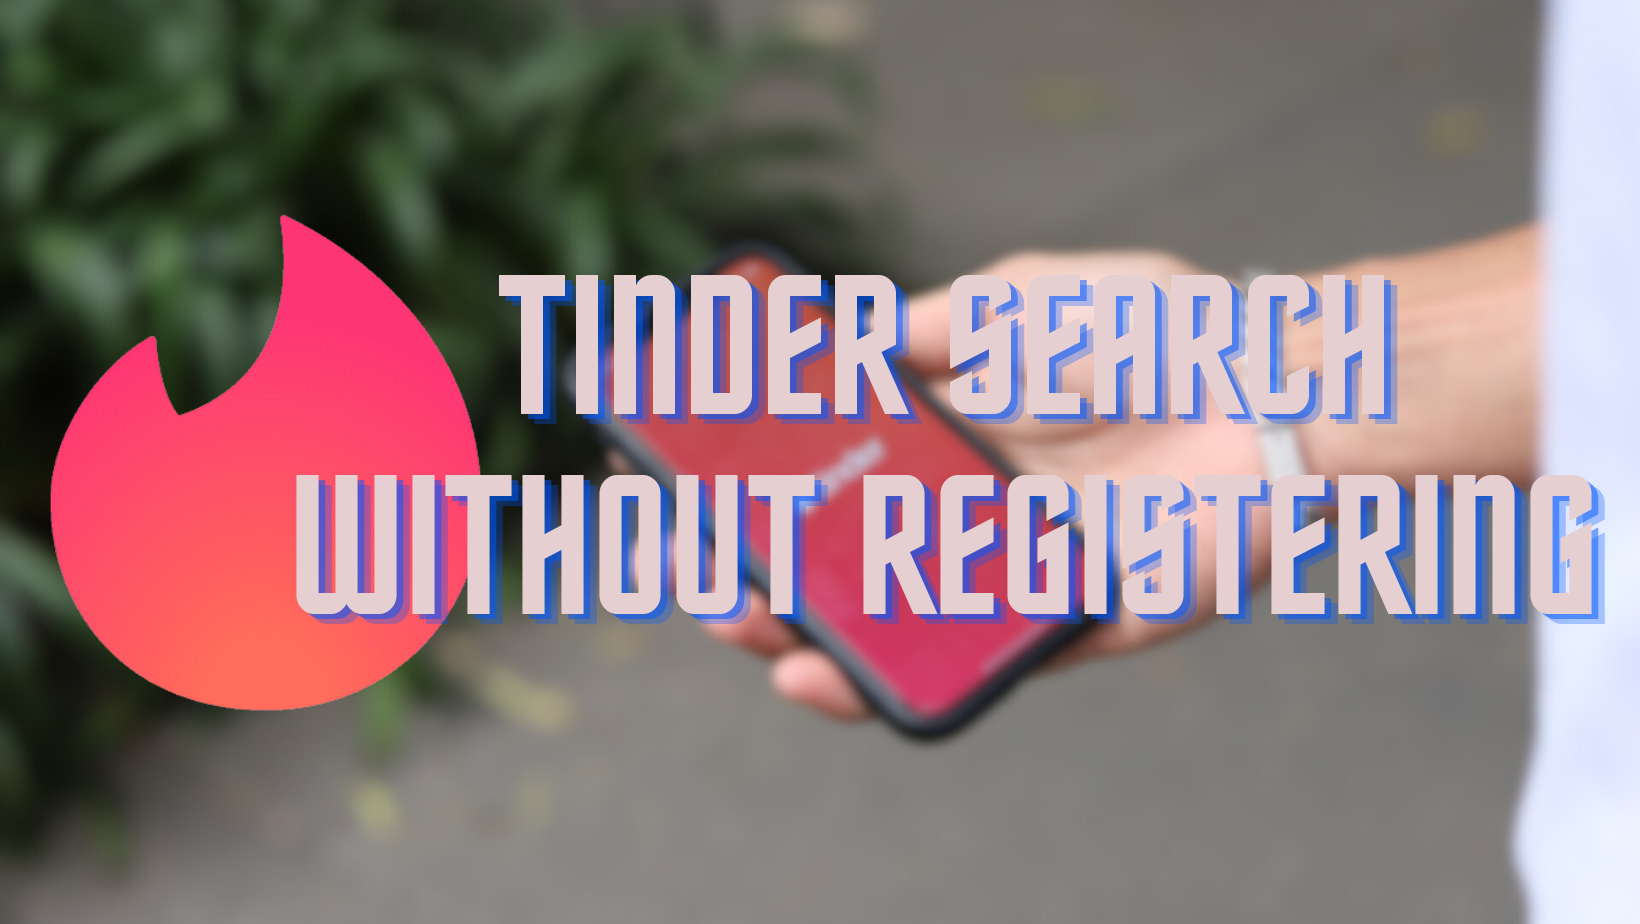 Tinder search without registering